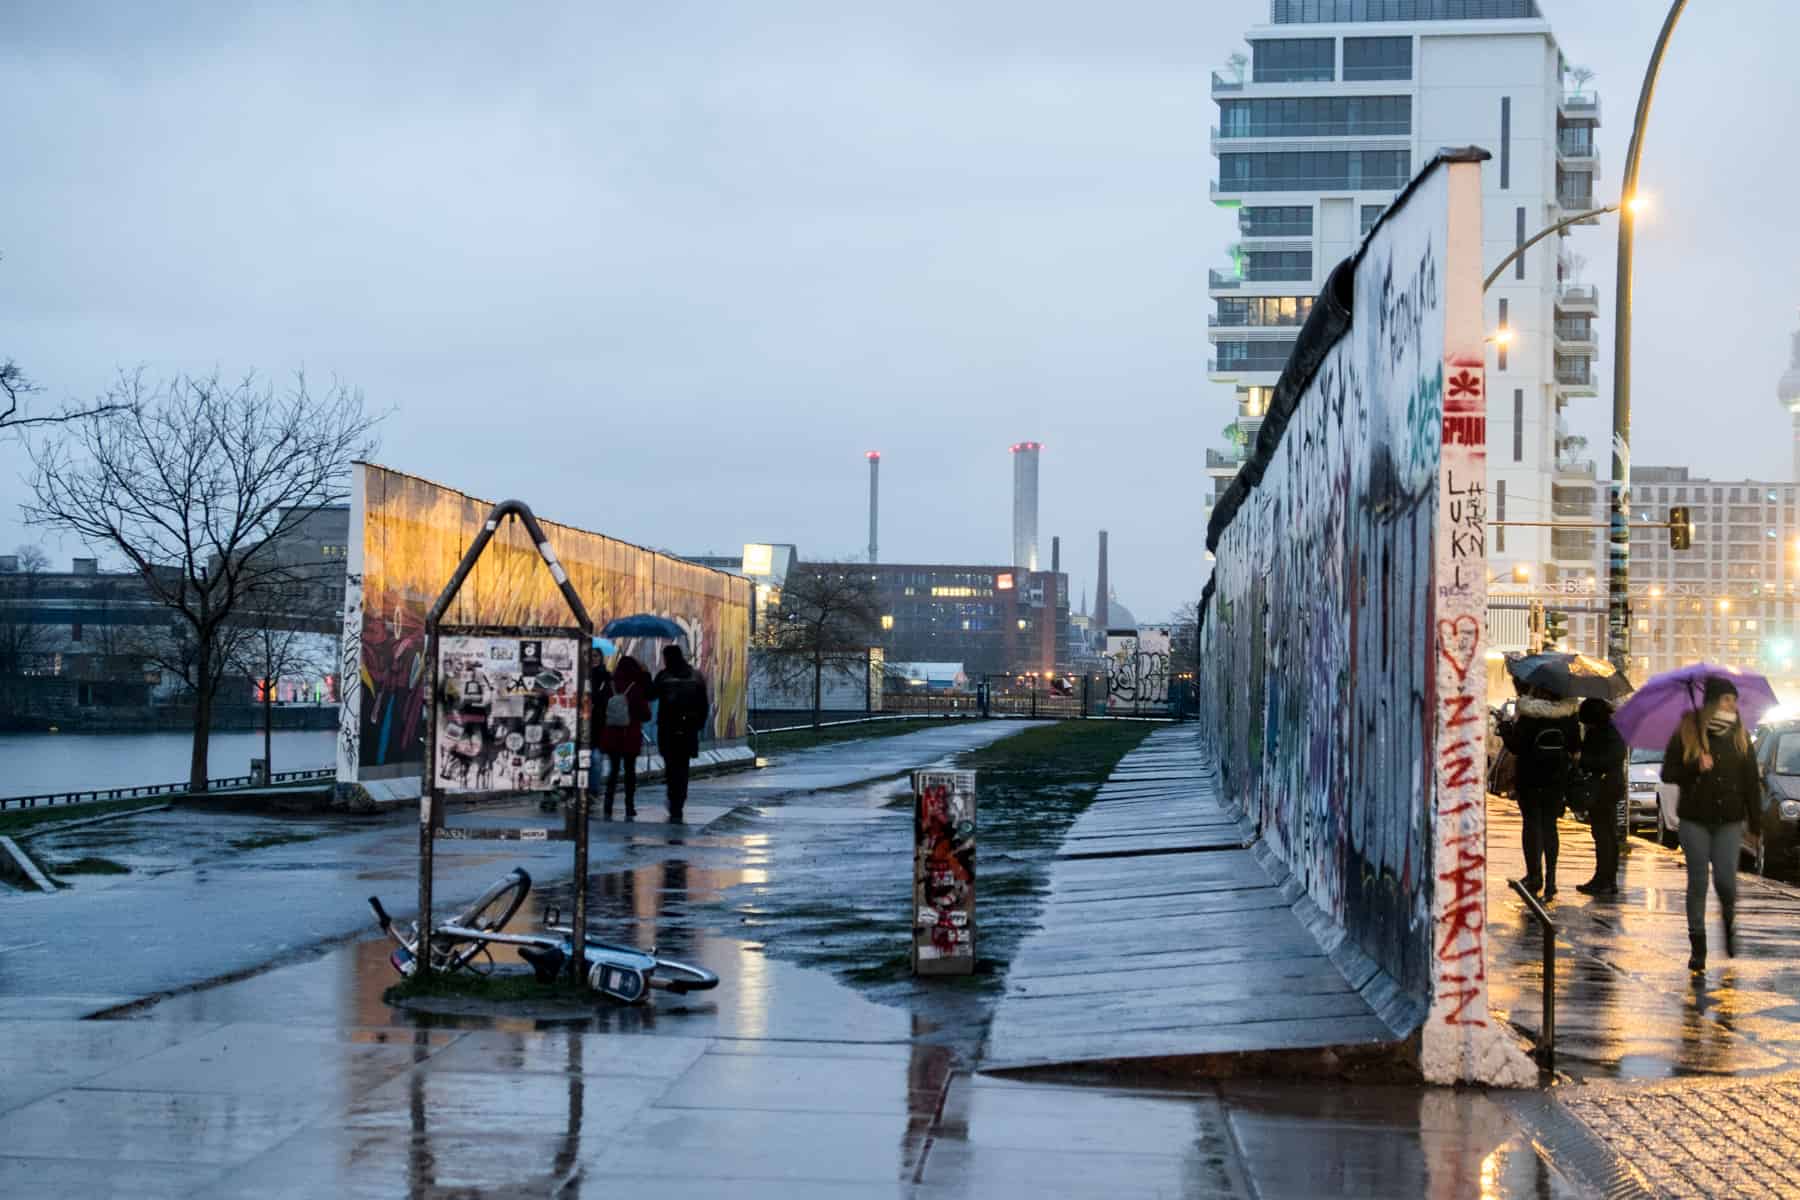 The space between two sections of the Berlin Wall at the East Side Gallery, in the evening rain